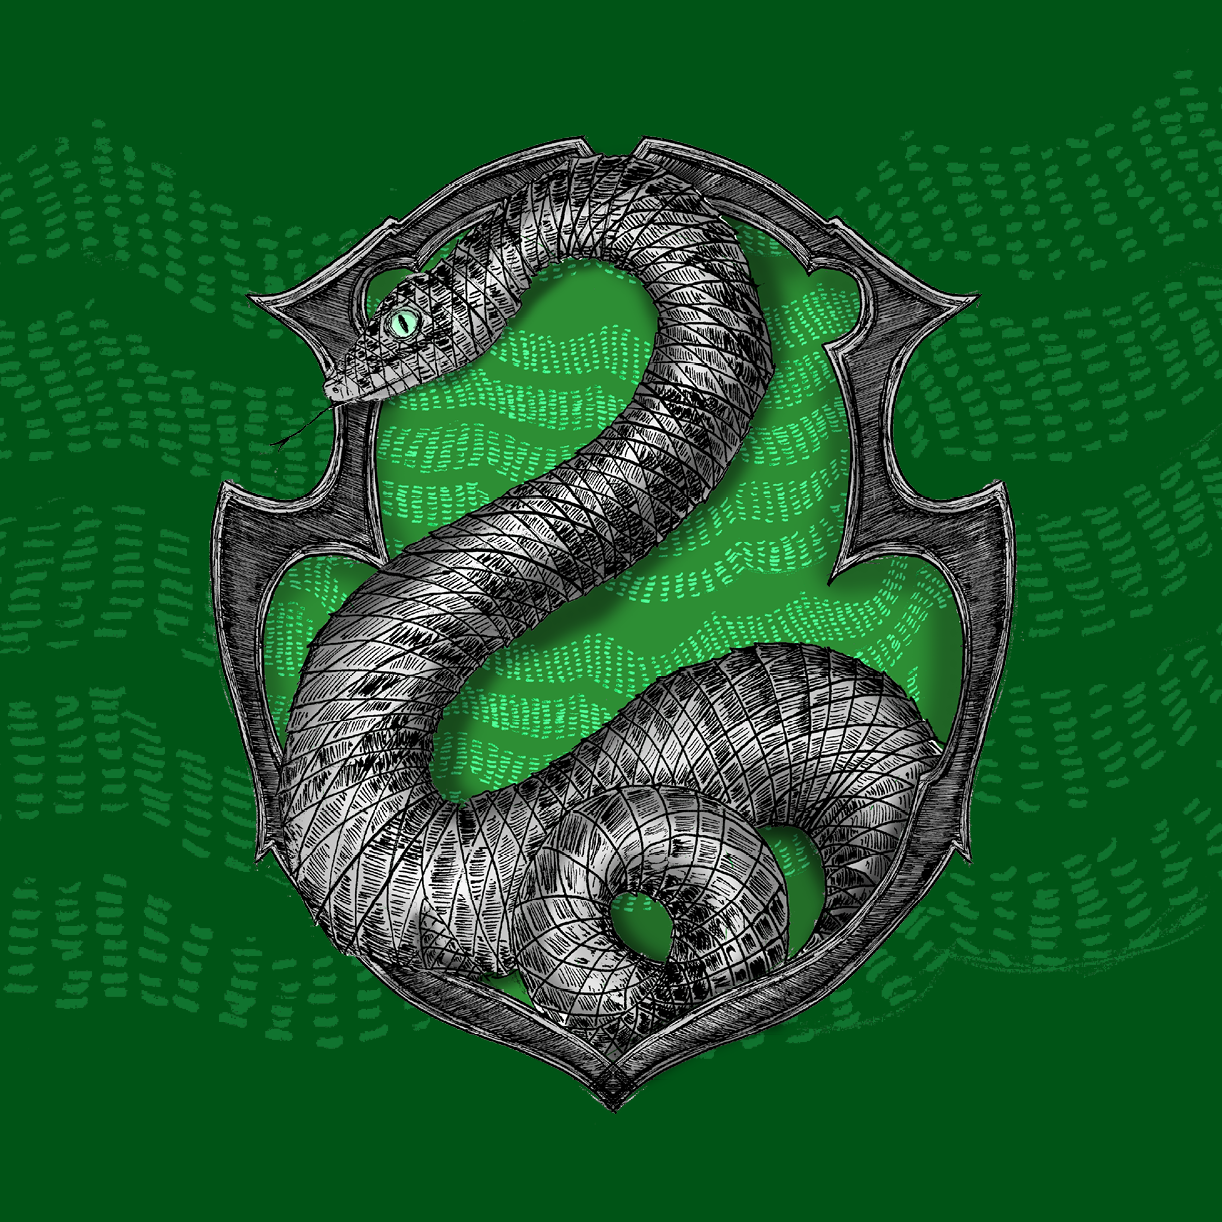 Slytherin Crest from Pottermore